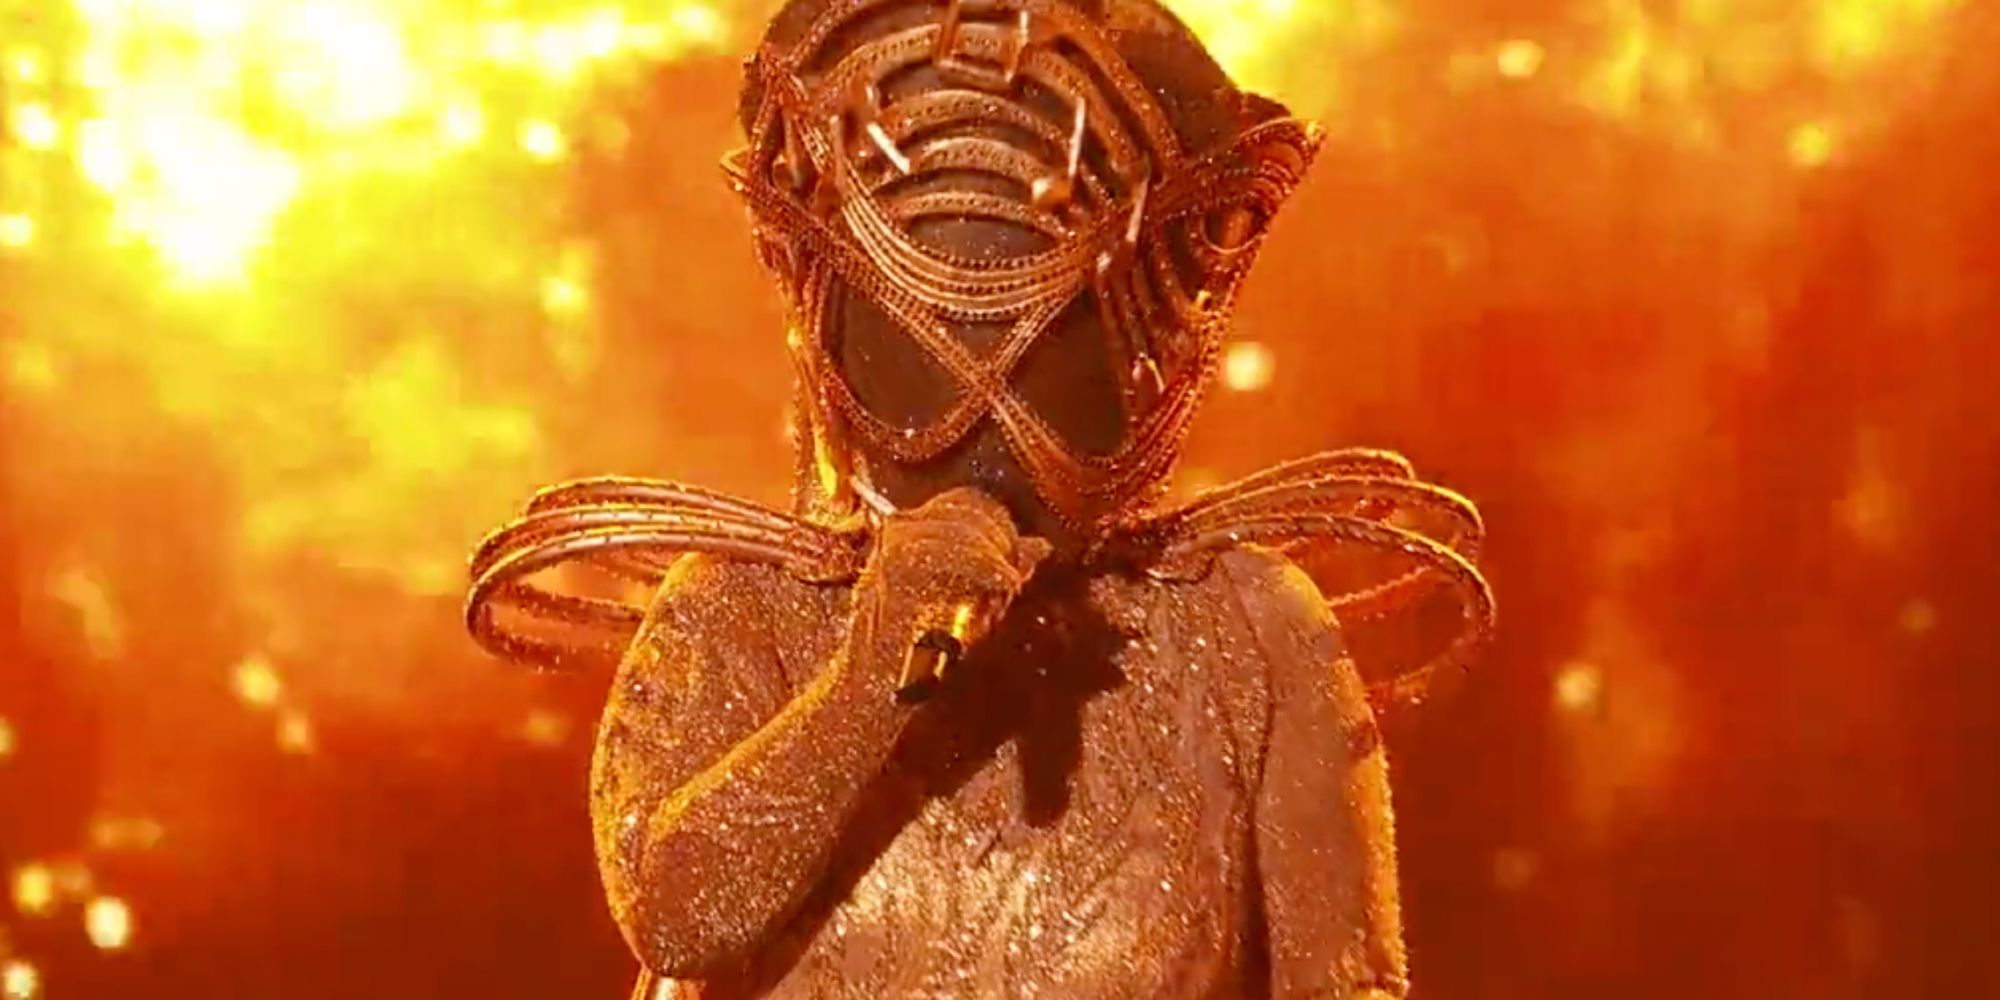 The Masked Singer: How Harp’s Finale Song Might Give Away Her Identity